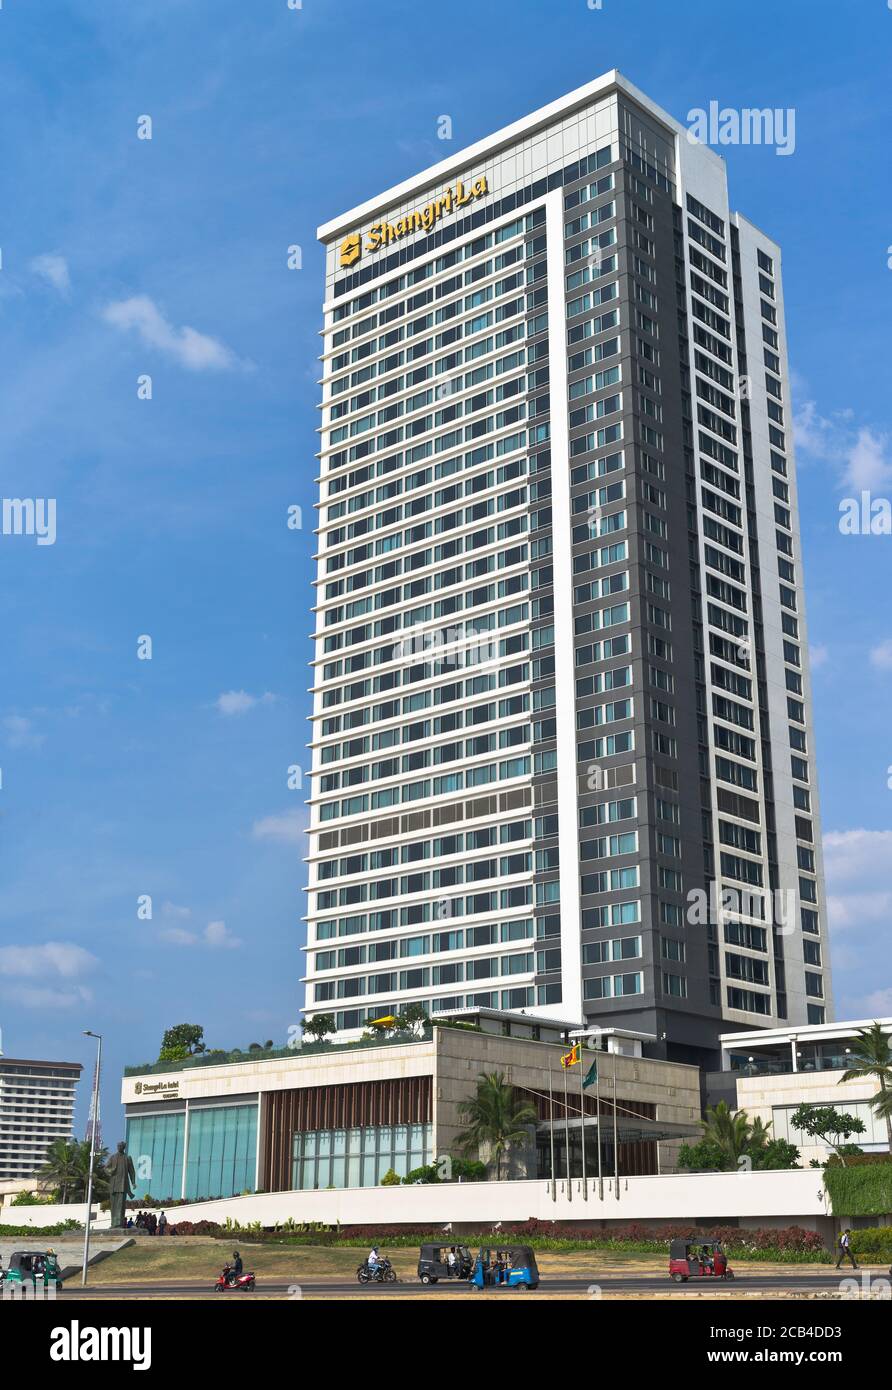 dh Galle Face Green buildings COLOMBO CITY SRI LANKA ASIA Shangri La Hotel waterfront building Stock Photo